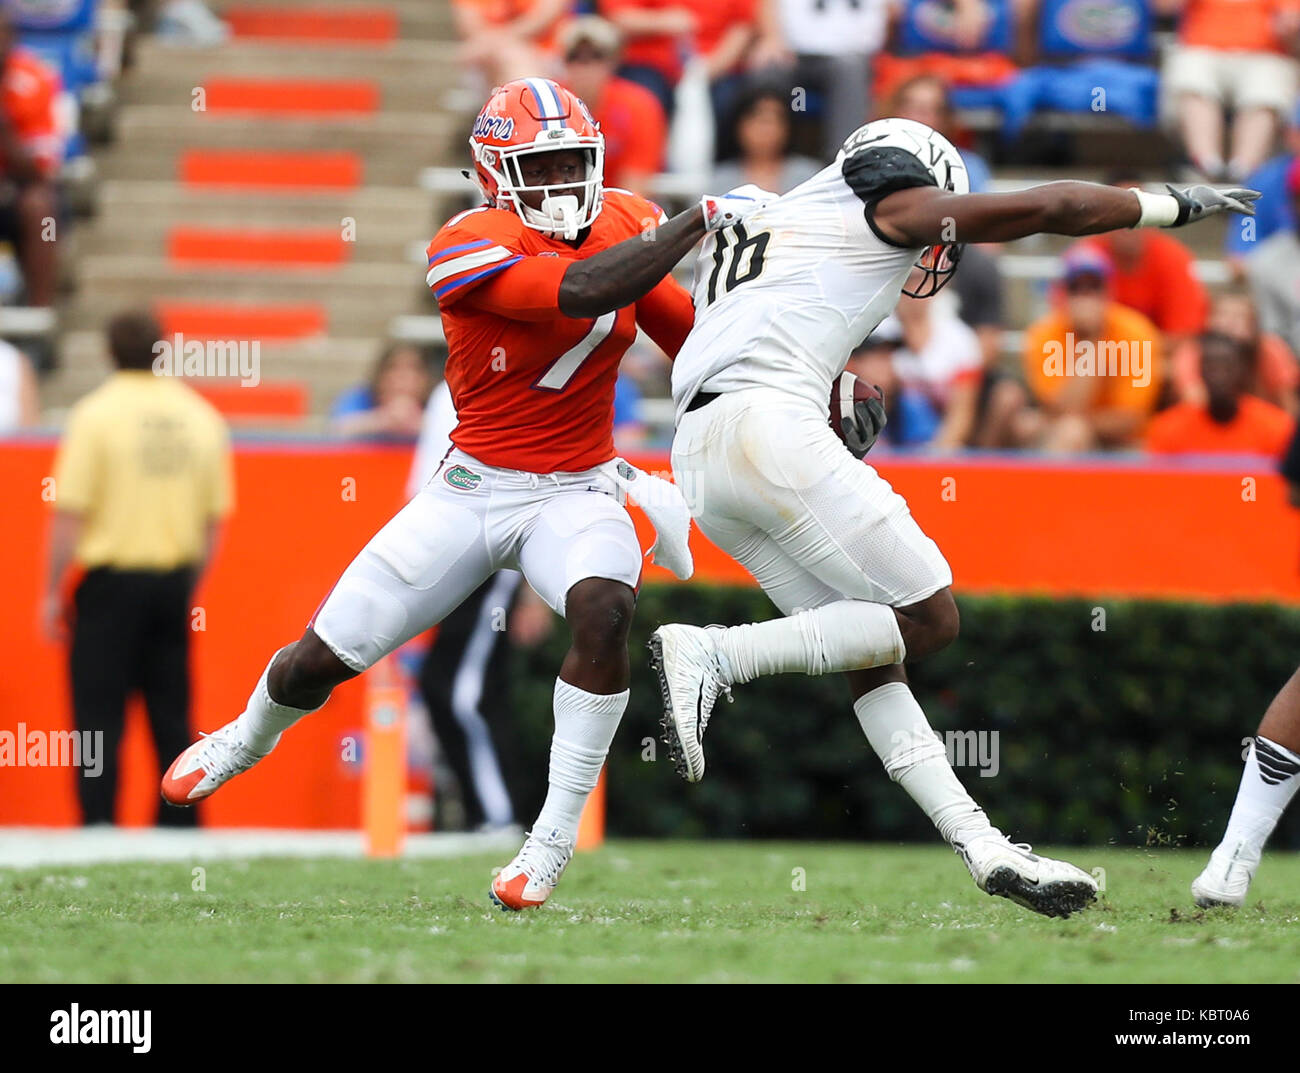 Gainesville, Florida, USA. 30th Sep, 2017. MONICA HERNDON | Times.Florida Gators defensive back Duke Dawson (7) throws Vanderbilt Commodores wide receiver Kalija Lipscomb (16) out of bounds during the fourth quarter of the Florida Gators game against Vanderbilt on September 30, 2017, at Ben Hill Griffin Stadium, in Gainesville, Fla. The Florida Gators defeated the Vanderbilt Commodores, 38 to 24. Credit: Monica Herndon/Tampa Bay Times/ZUMA Wire/Alamy Live News Stock Photo